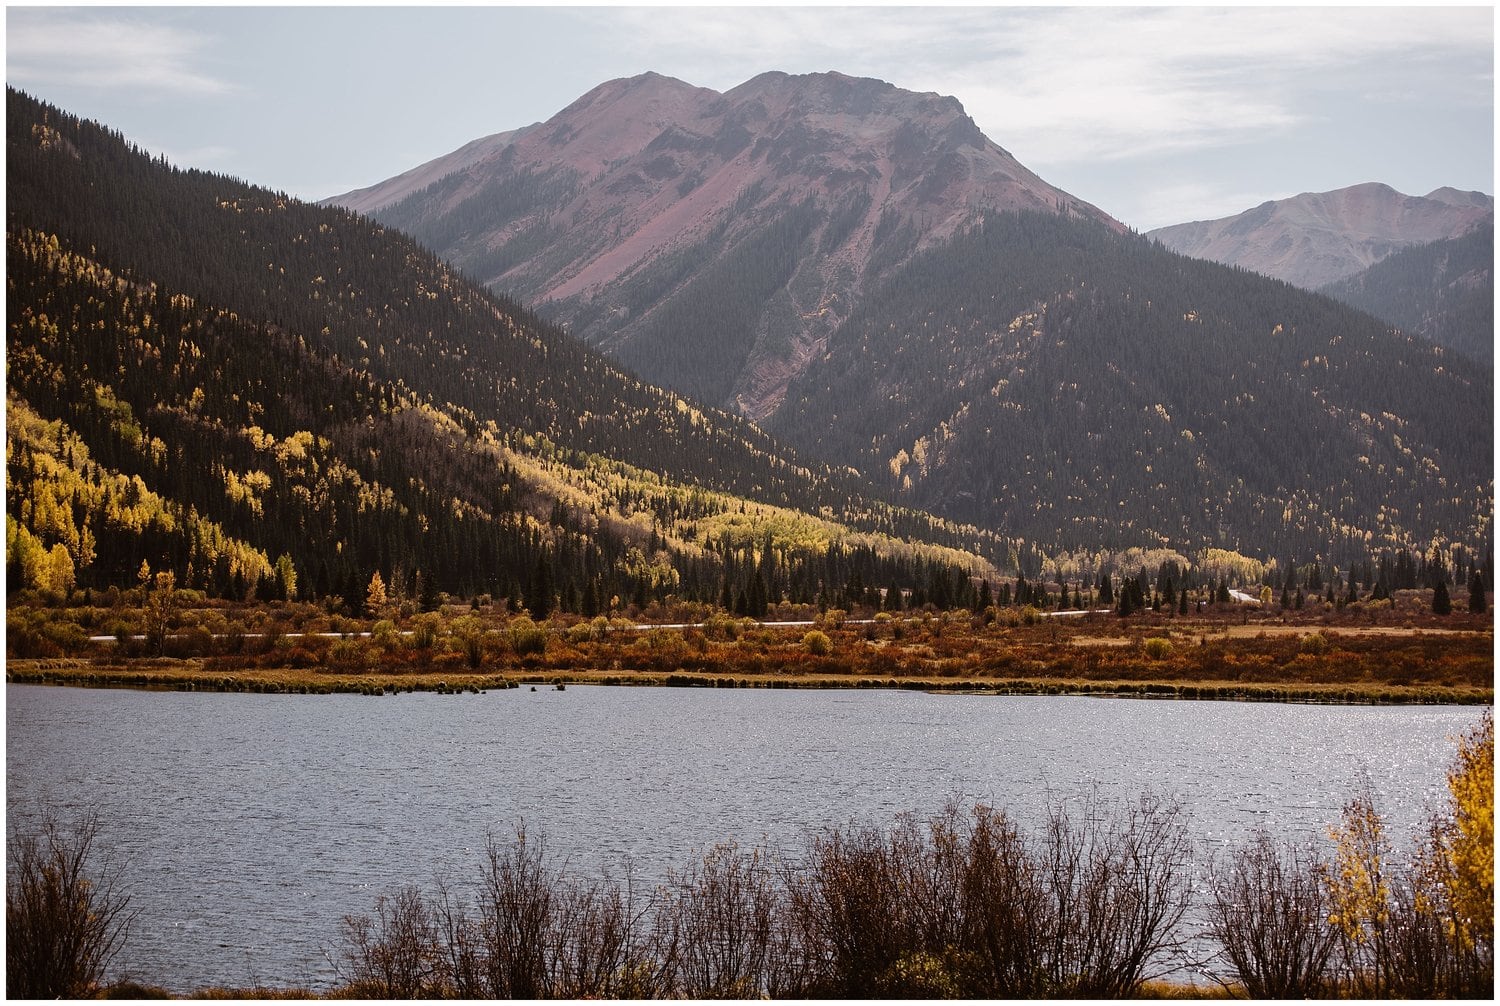 Landscape of mountains and lake with fall colors in Ouray, Colorado. 